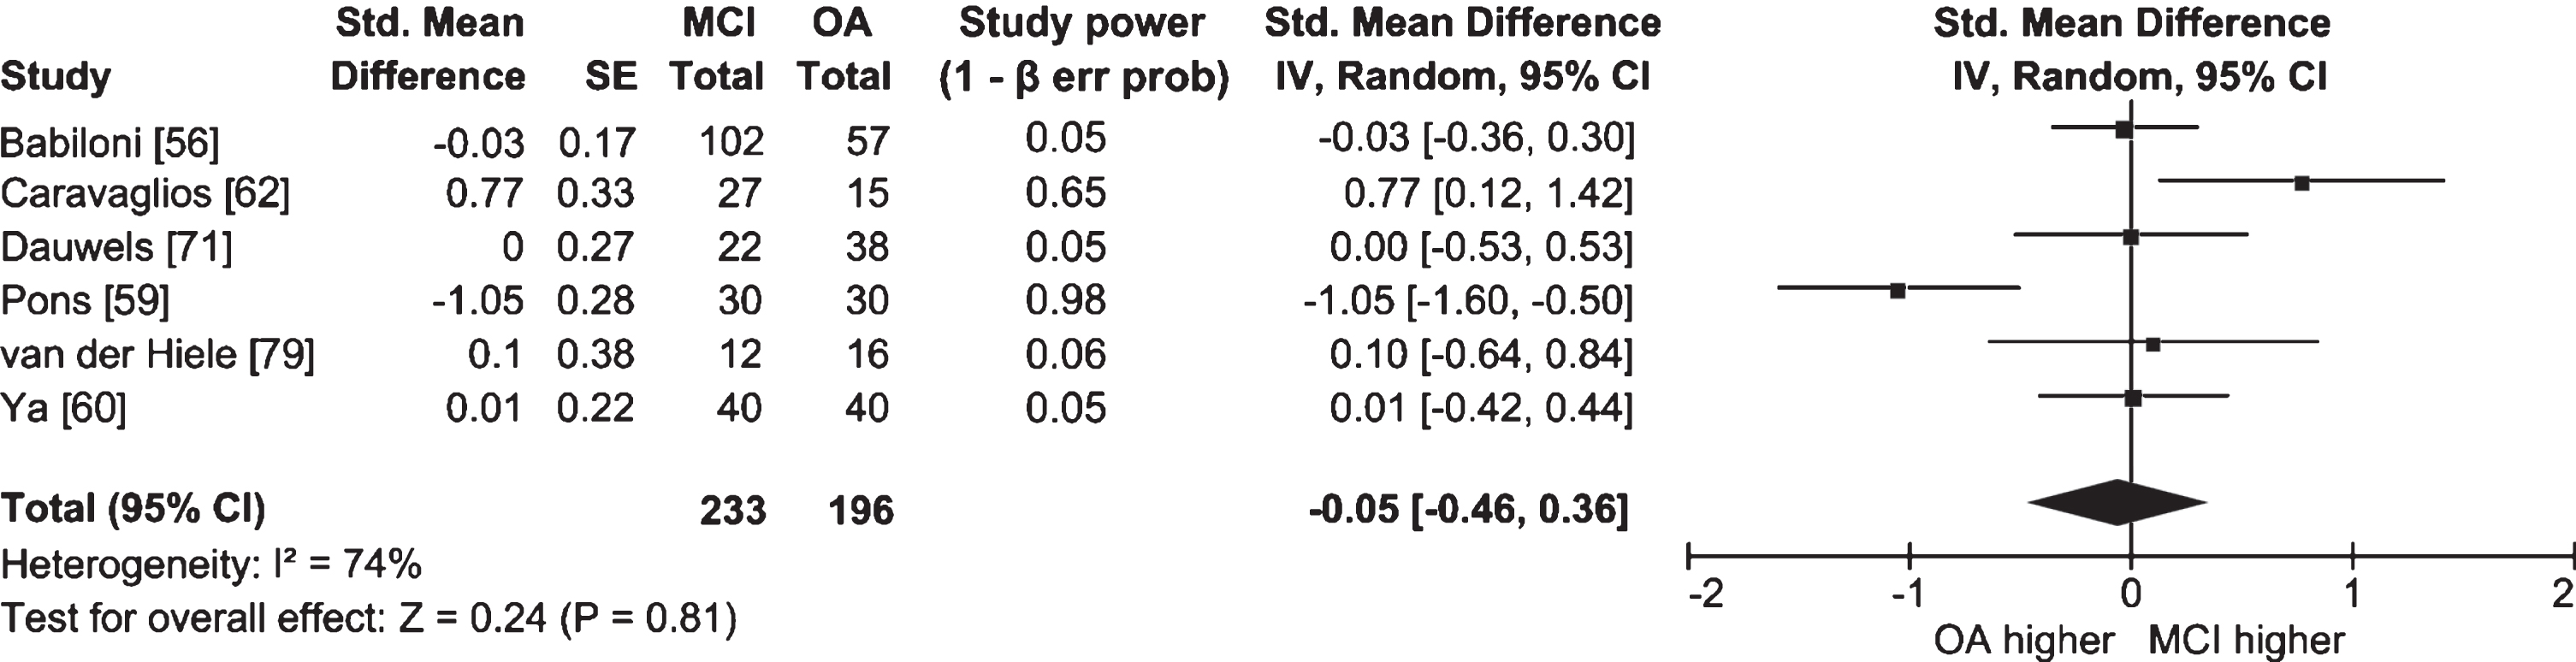 Table and forest plot of effect sizes for power in awake resting state in the upper alpha band in people with MCI versus cognitively healthy older adults (OA). The table shows sample size (Total) for each participant group. For the explanation of the table and the plot, see Fig. 2.